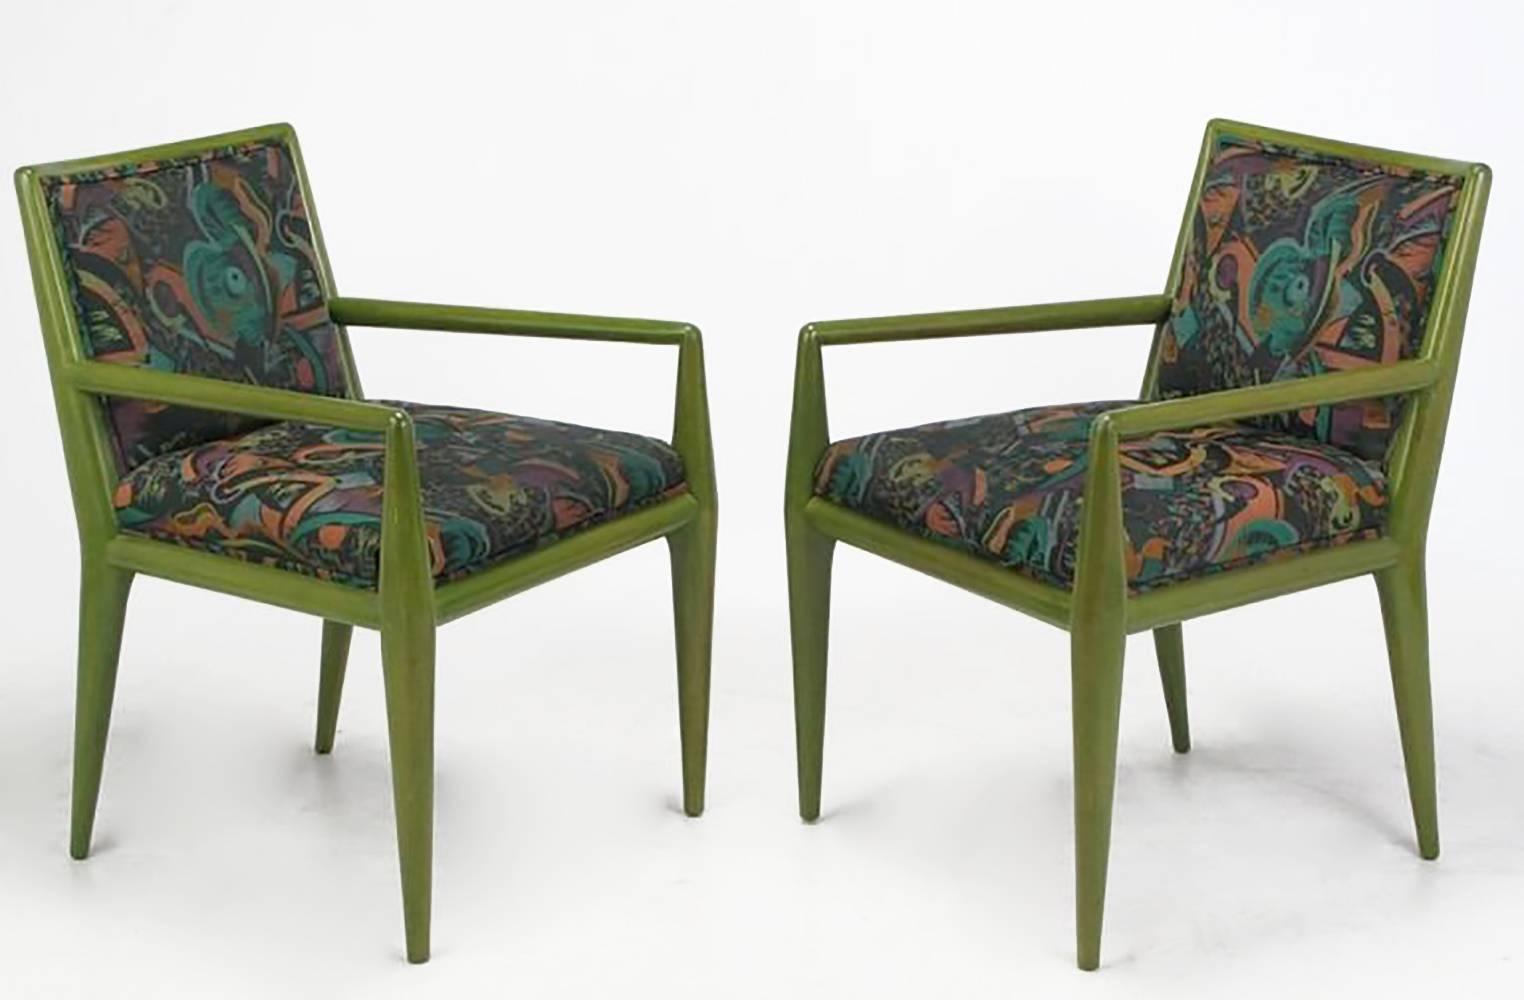 Unexpected moss green stained walnut arm chairs, with a colorful deco revival woven upholstery by T.H. Robsjohn-Gibbings for Widdicomb. Older custom refinishing in great condition. Also, we can refinish these back to the original aged maple finish